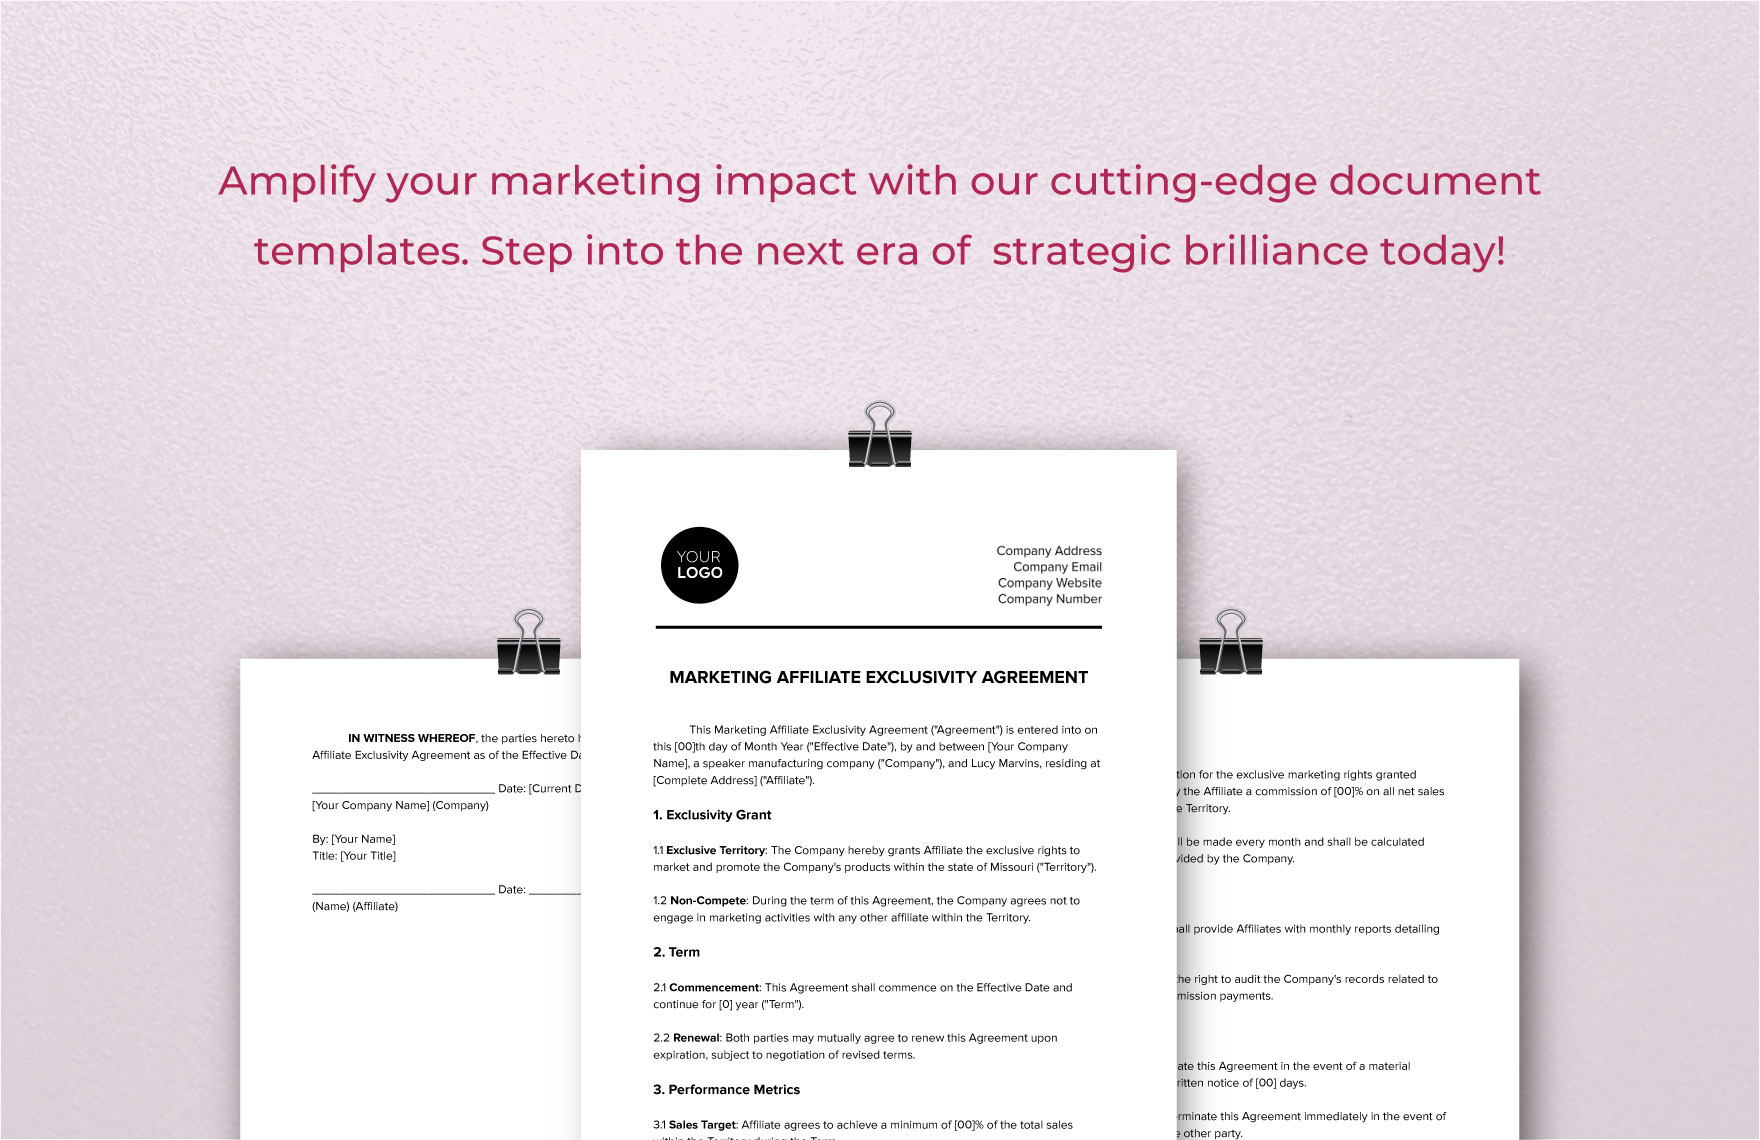 Marketing Affiliate Exclusivity Agreement Template